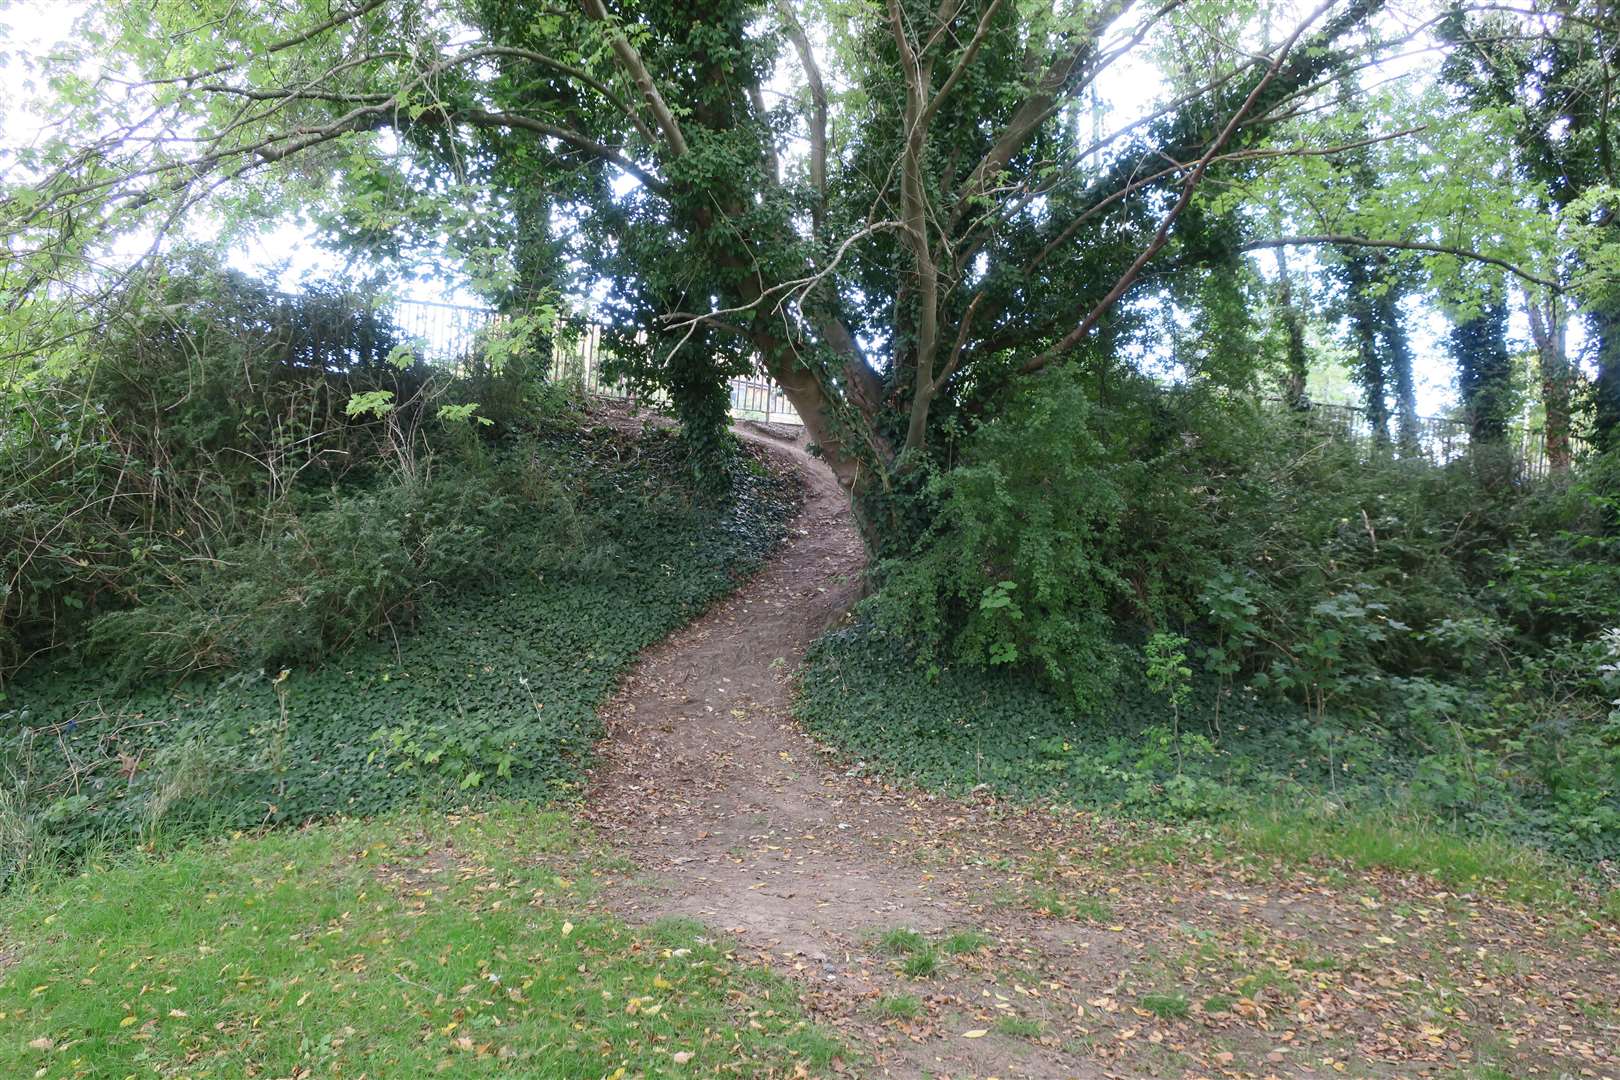 The path that has been carved out by walkers trying to avoid the dual carriageway